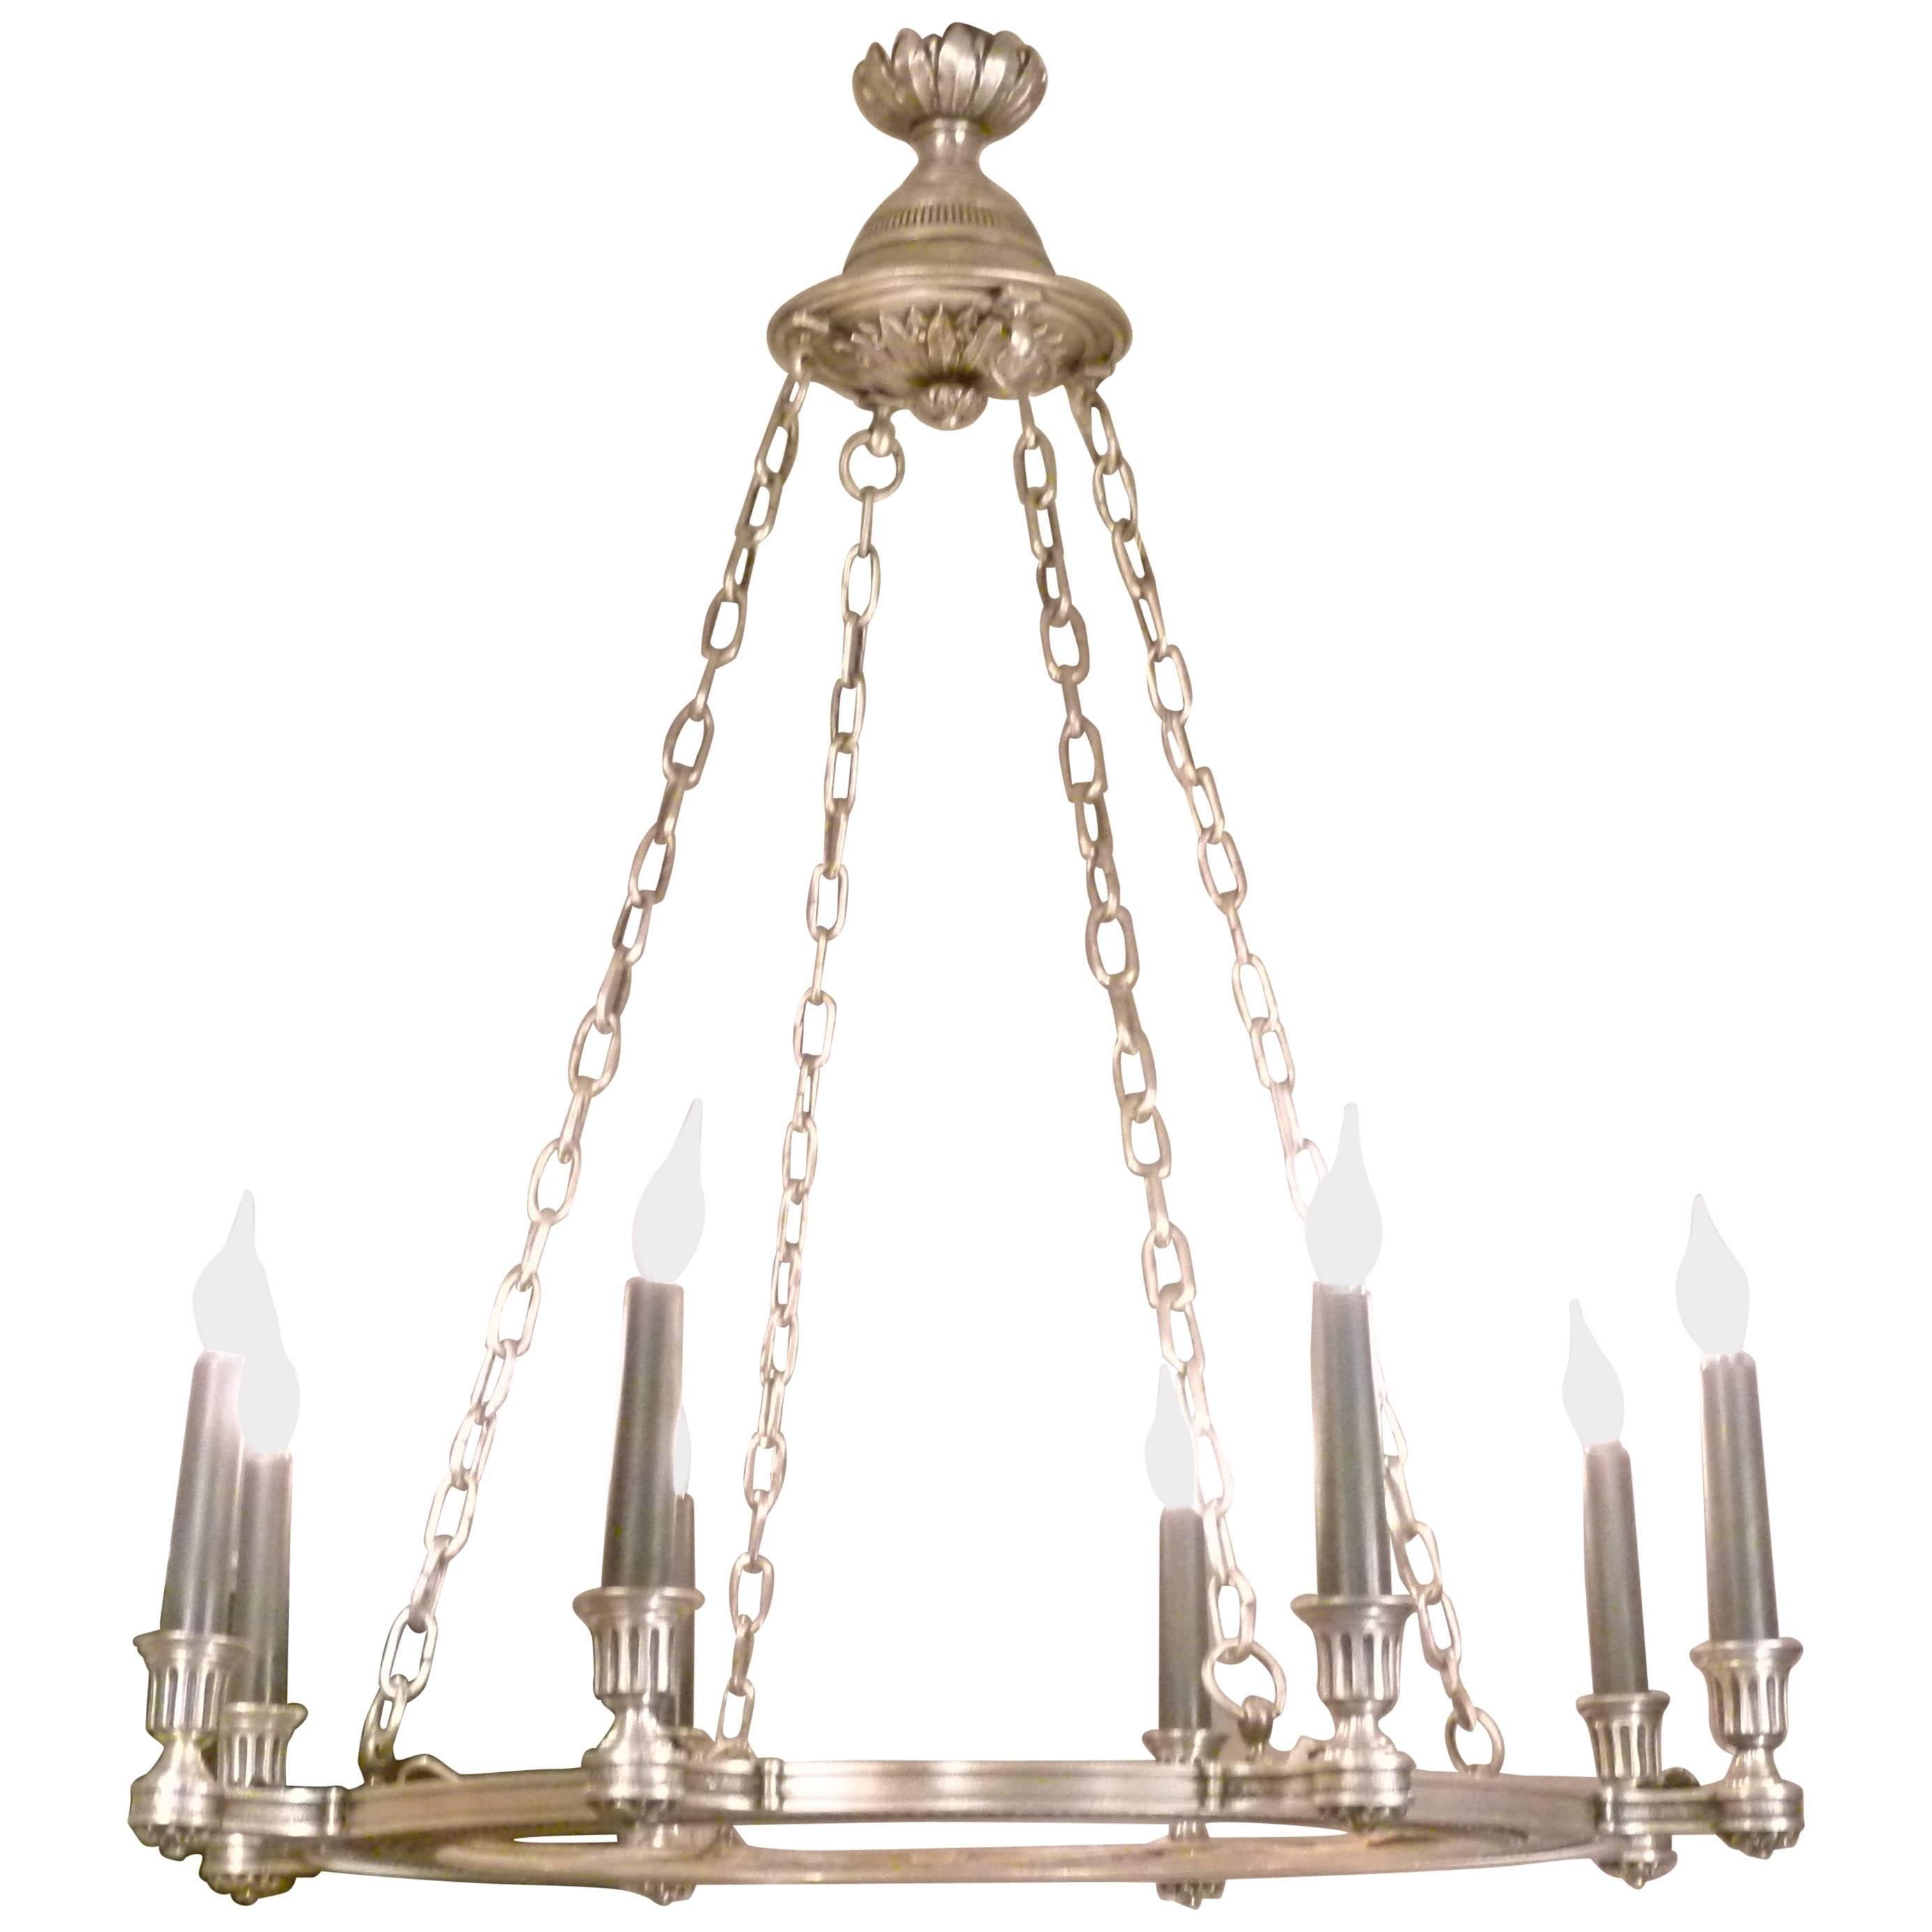 Neoclassical Eight-Light Chandelier in Silvered Bronze